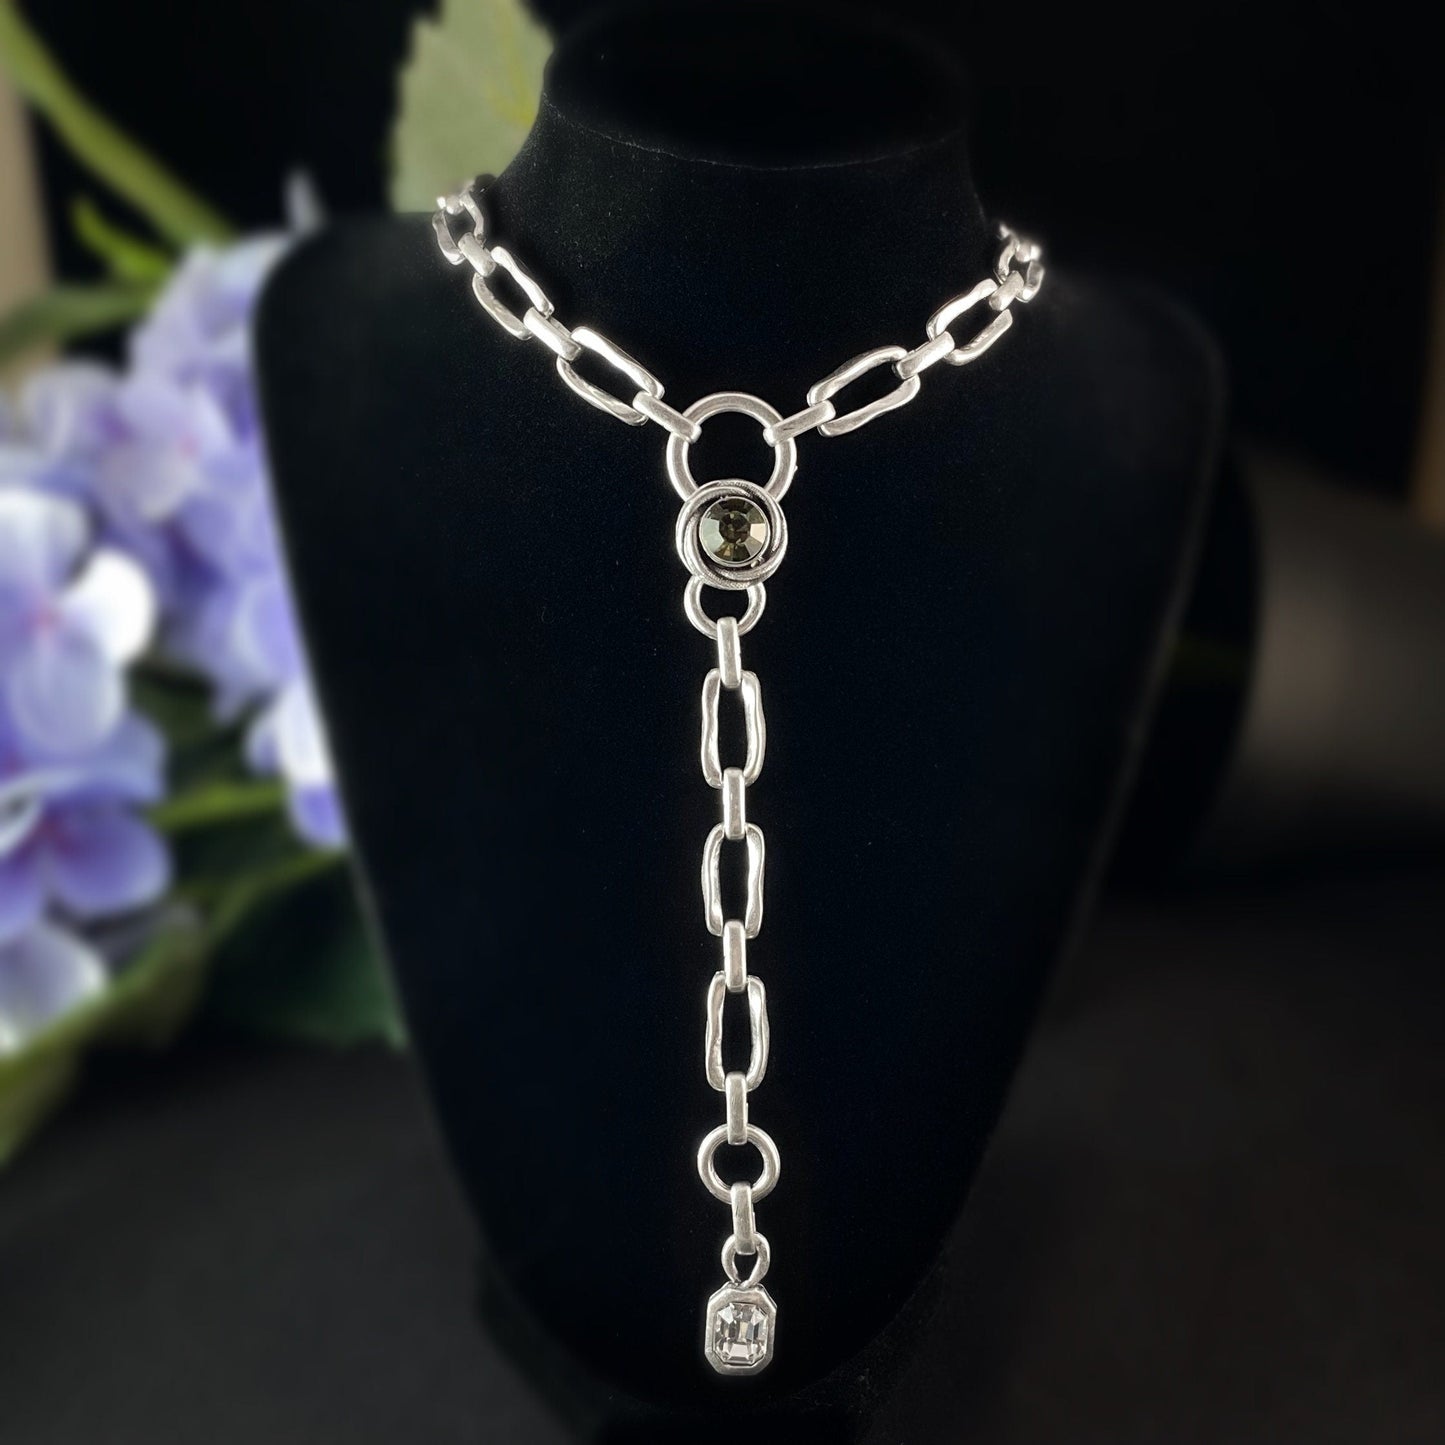 Long Silver Chain Link Necklace with Crystals, Handmade, Nickel Free